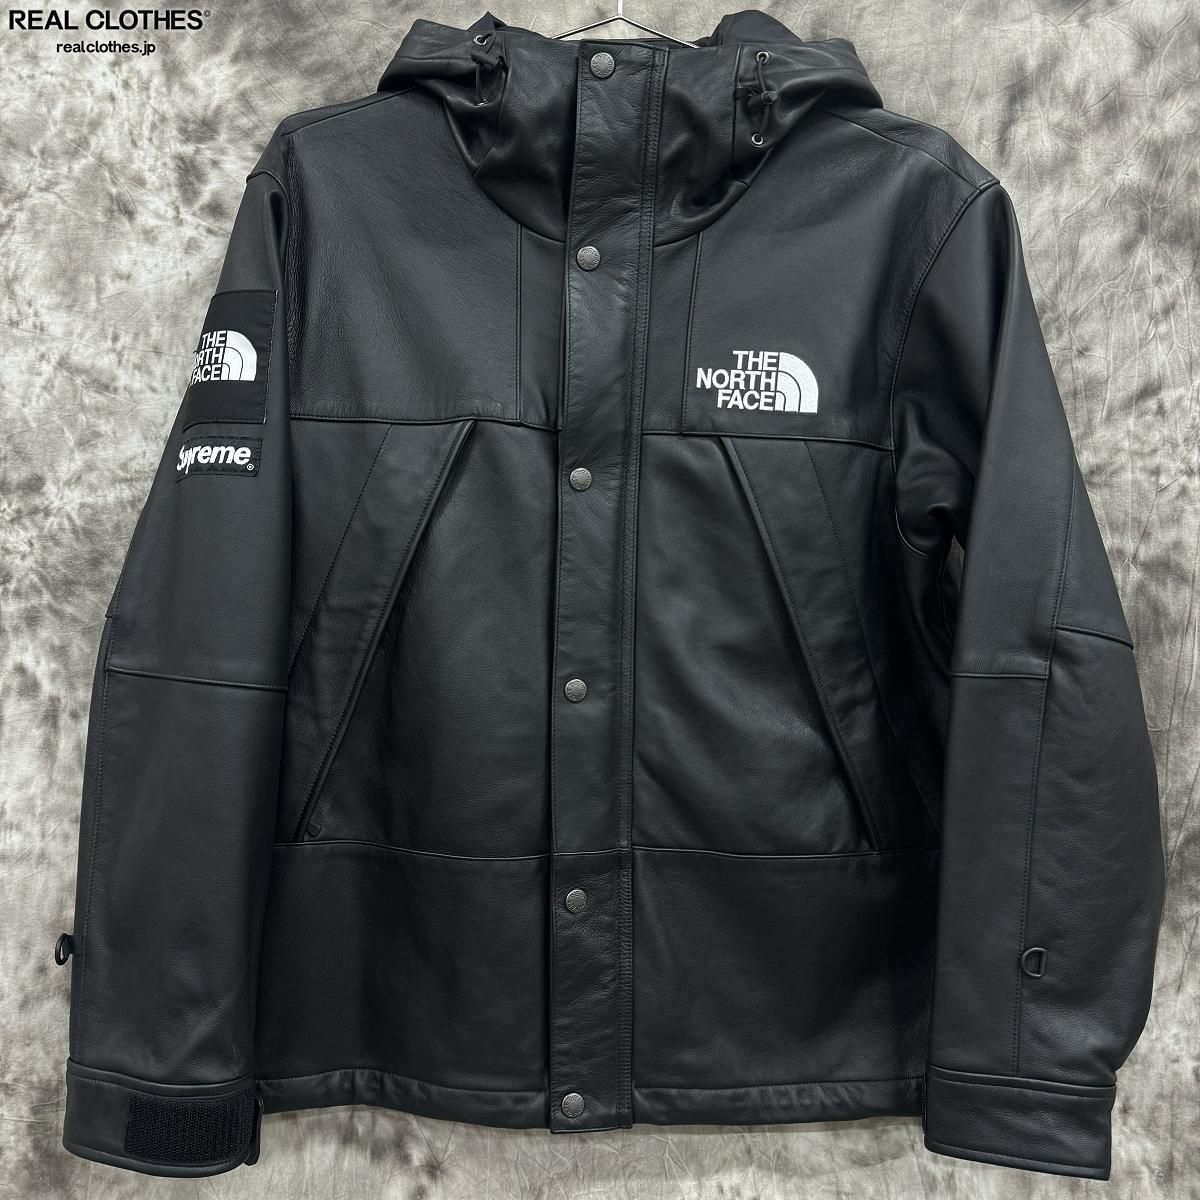 Supreme×THE NORTH FACE/シュプリーム×ノースフェイス【18AW】Leather Mountain Parka  レザーマウンテンパーカー NP61807I/S